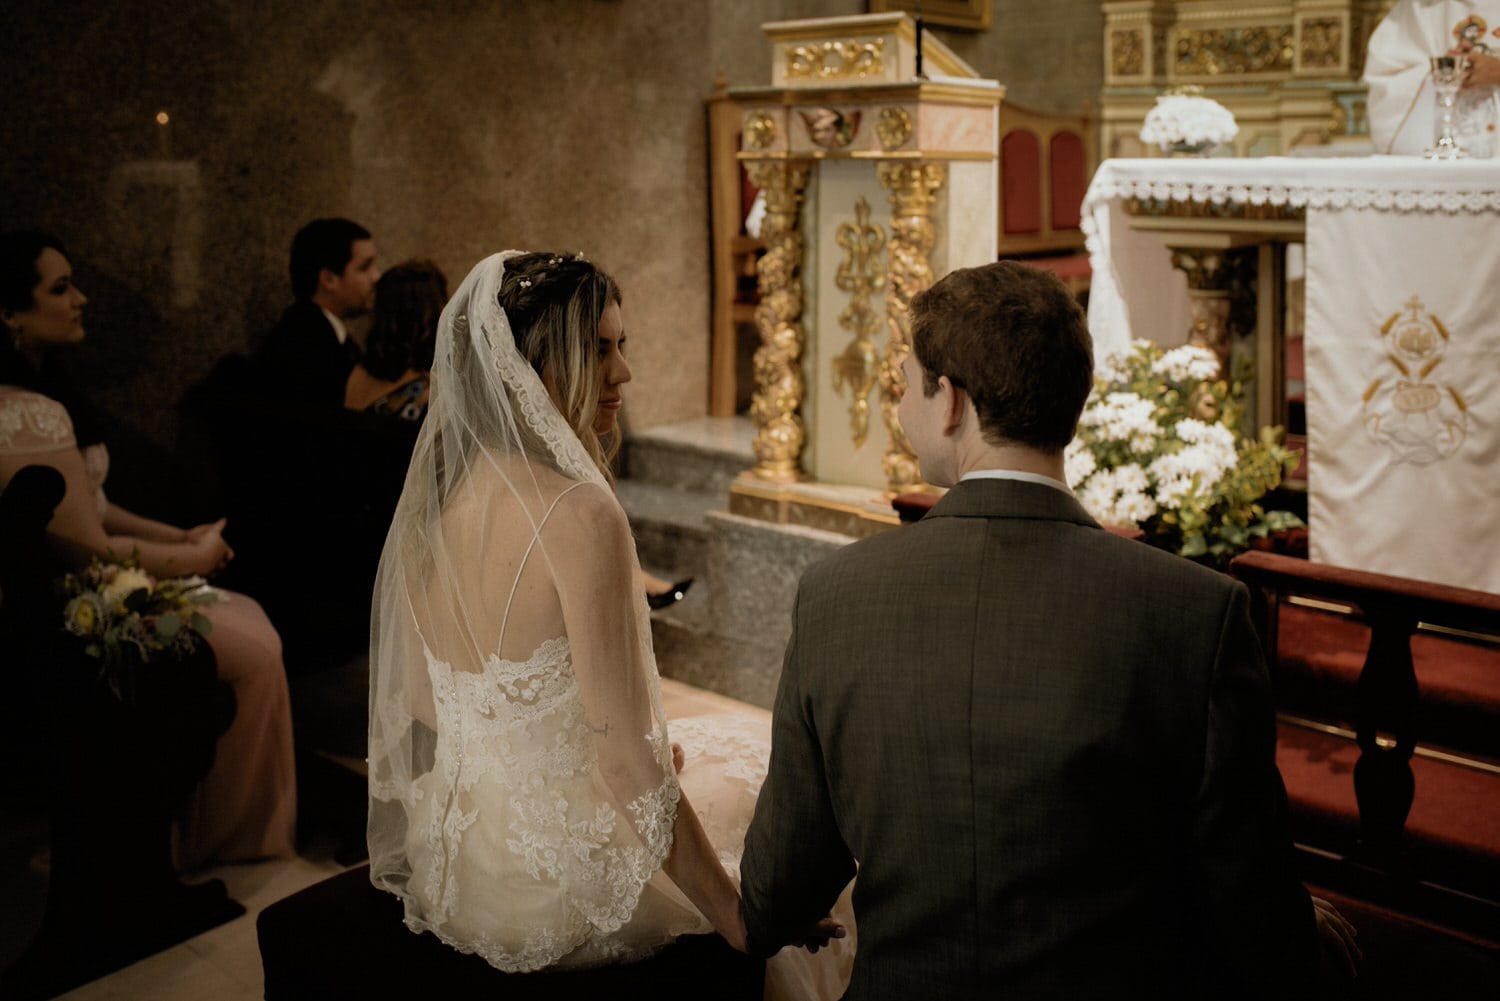 bride sharing an intimate moment after getting married in church in Portugal